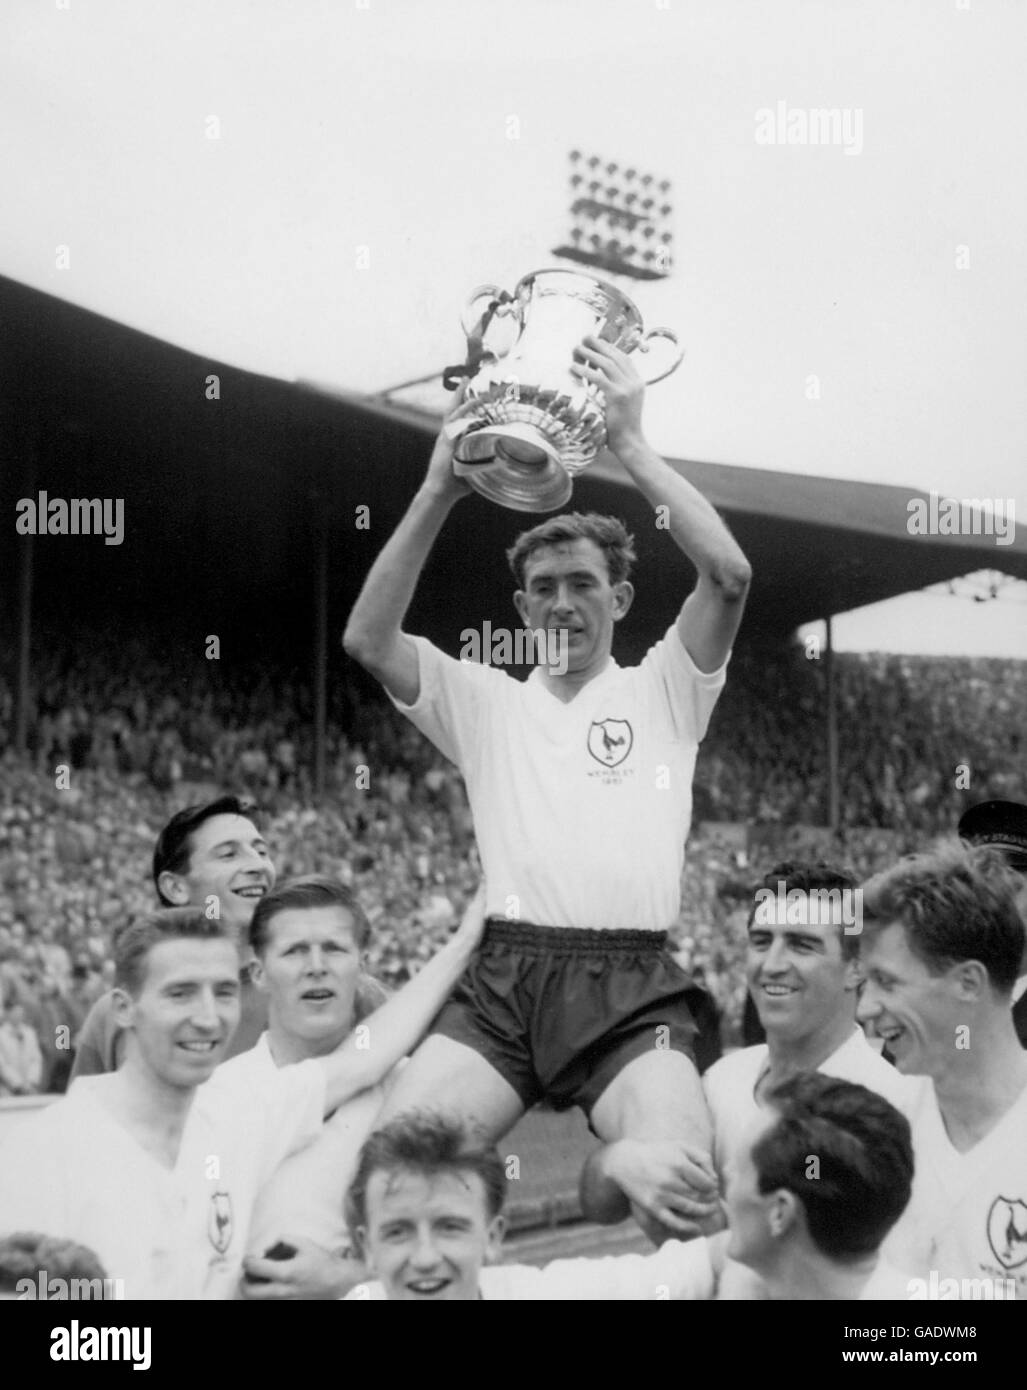 Tottenham Hotspur captain Danny Blanchflower holds the FA Cup aloft as he is chaired by teammates (l-r) Cliff Jones, Bill Brown, Peter Baker, Terry Dyson, Les Allen, Bobby Smith and John White Stock Photo